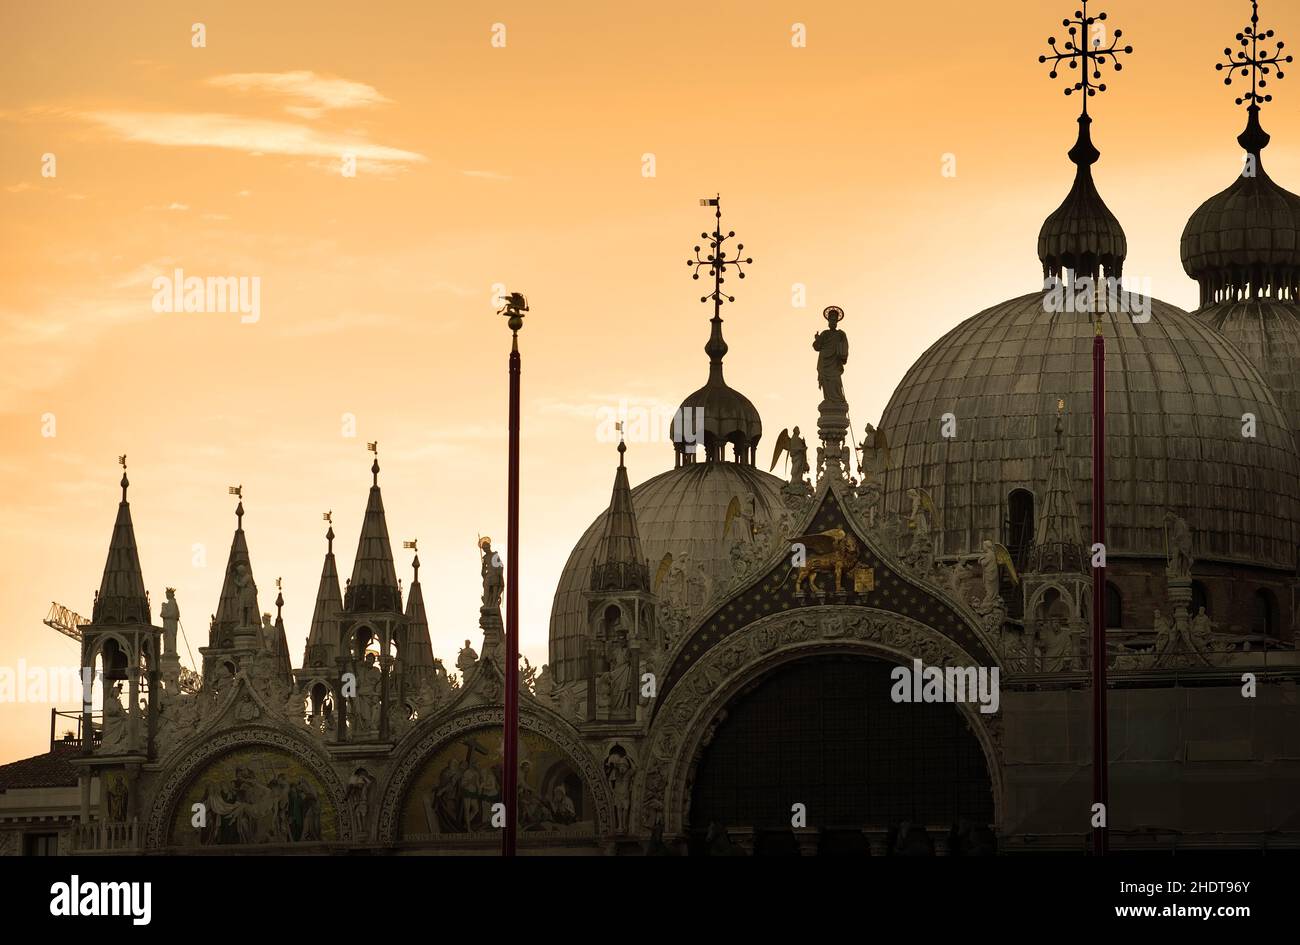 dome, st mark's cathedral, domes, st. mark's cathedrals Stock Photo